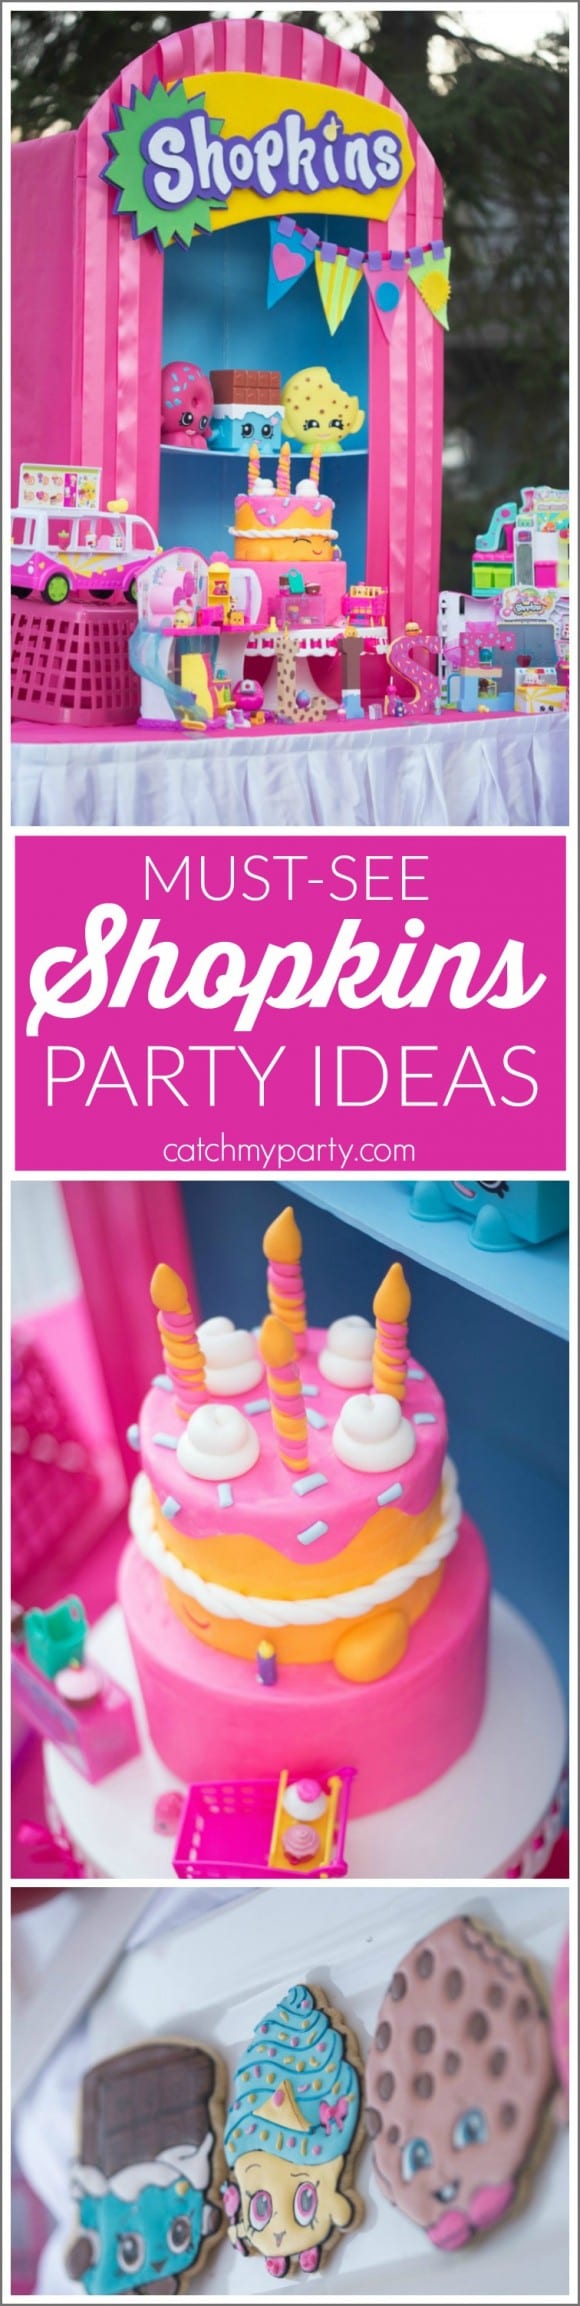 must-see-shopkins-party-ideas2